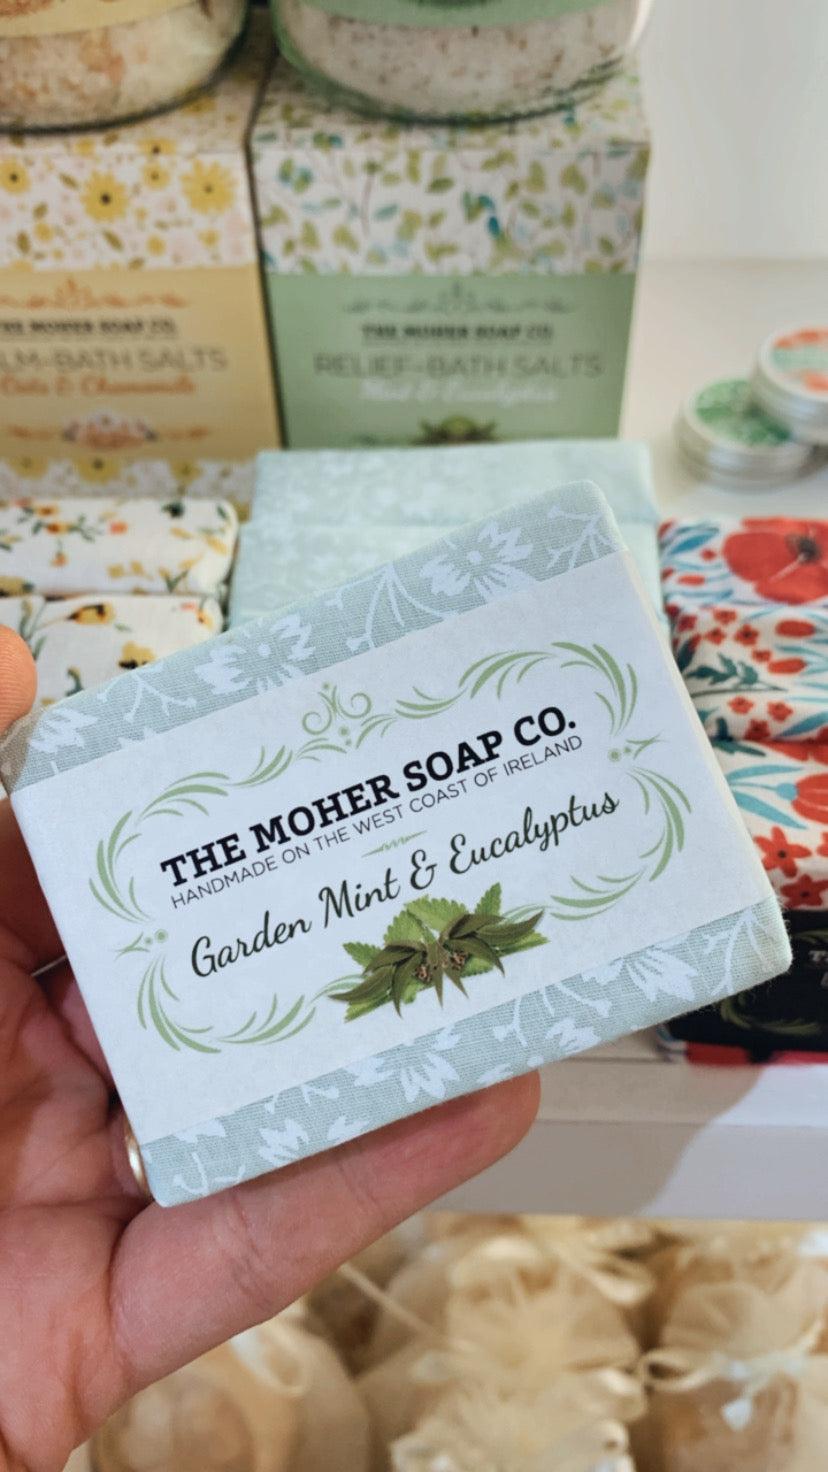 Moher Soap and Scrubs